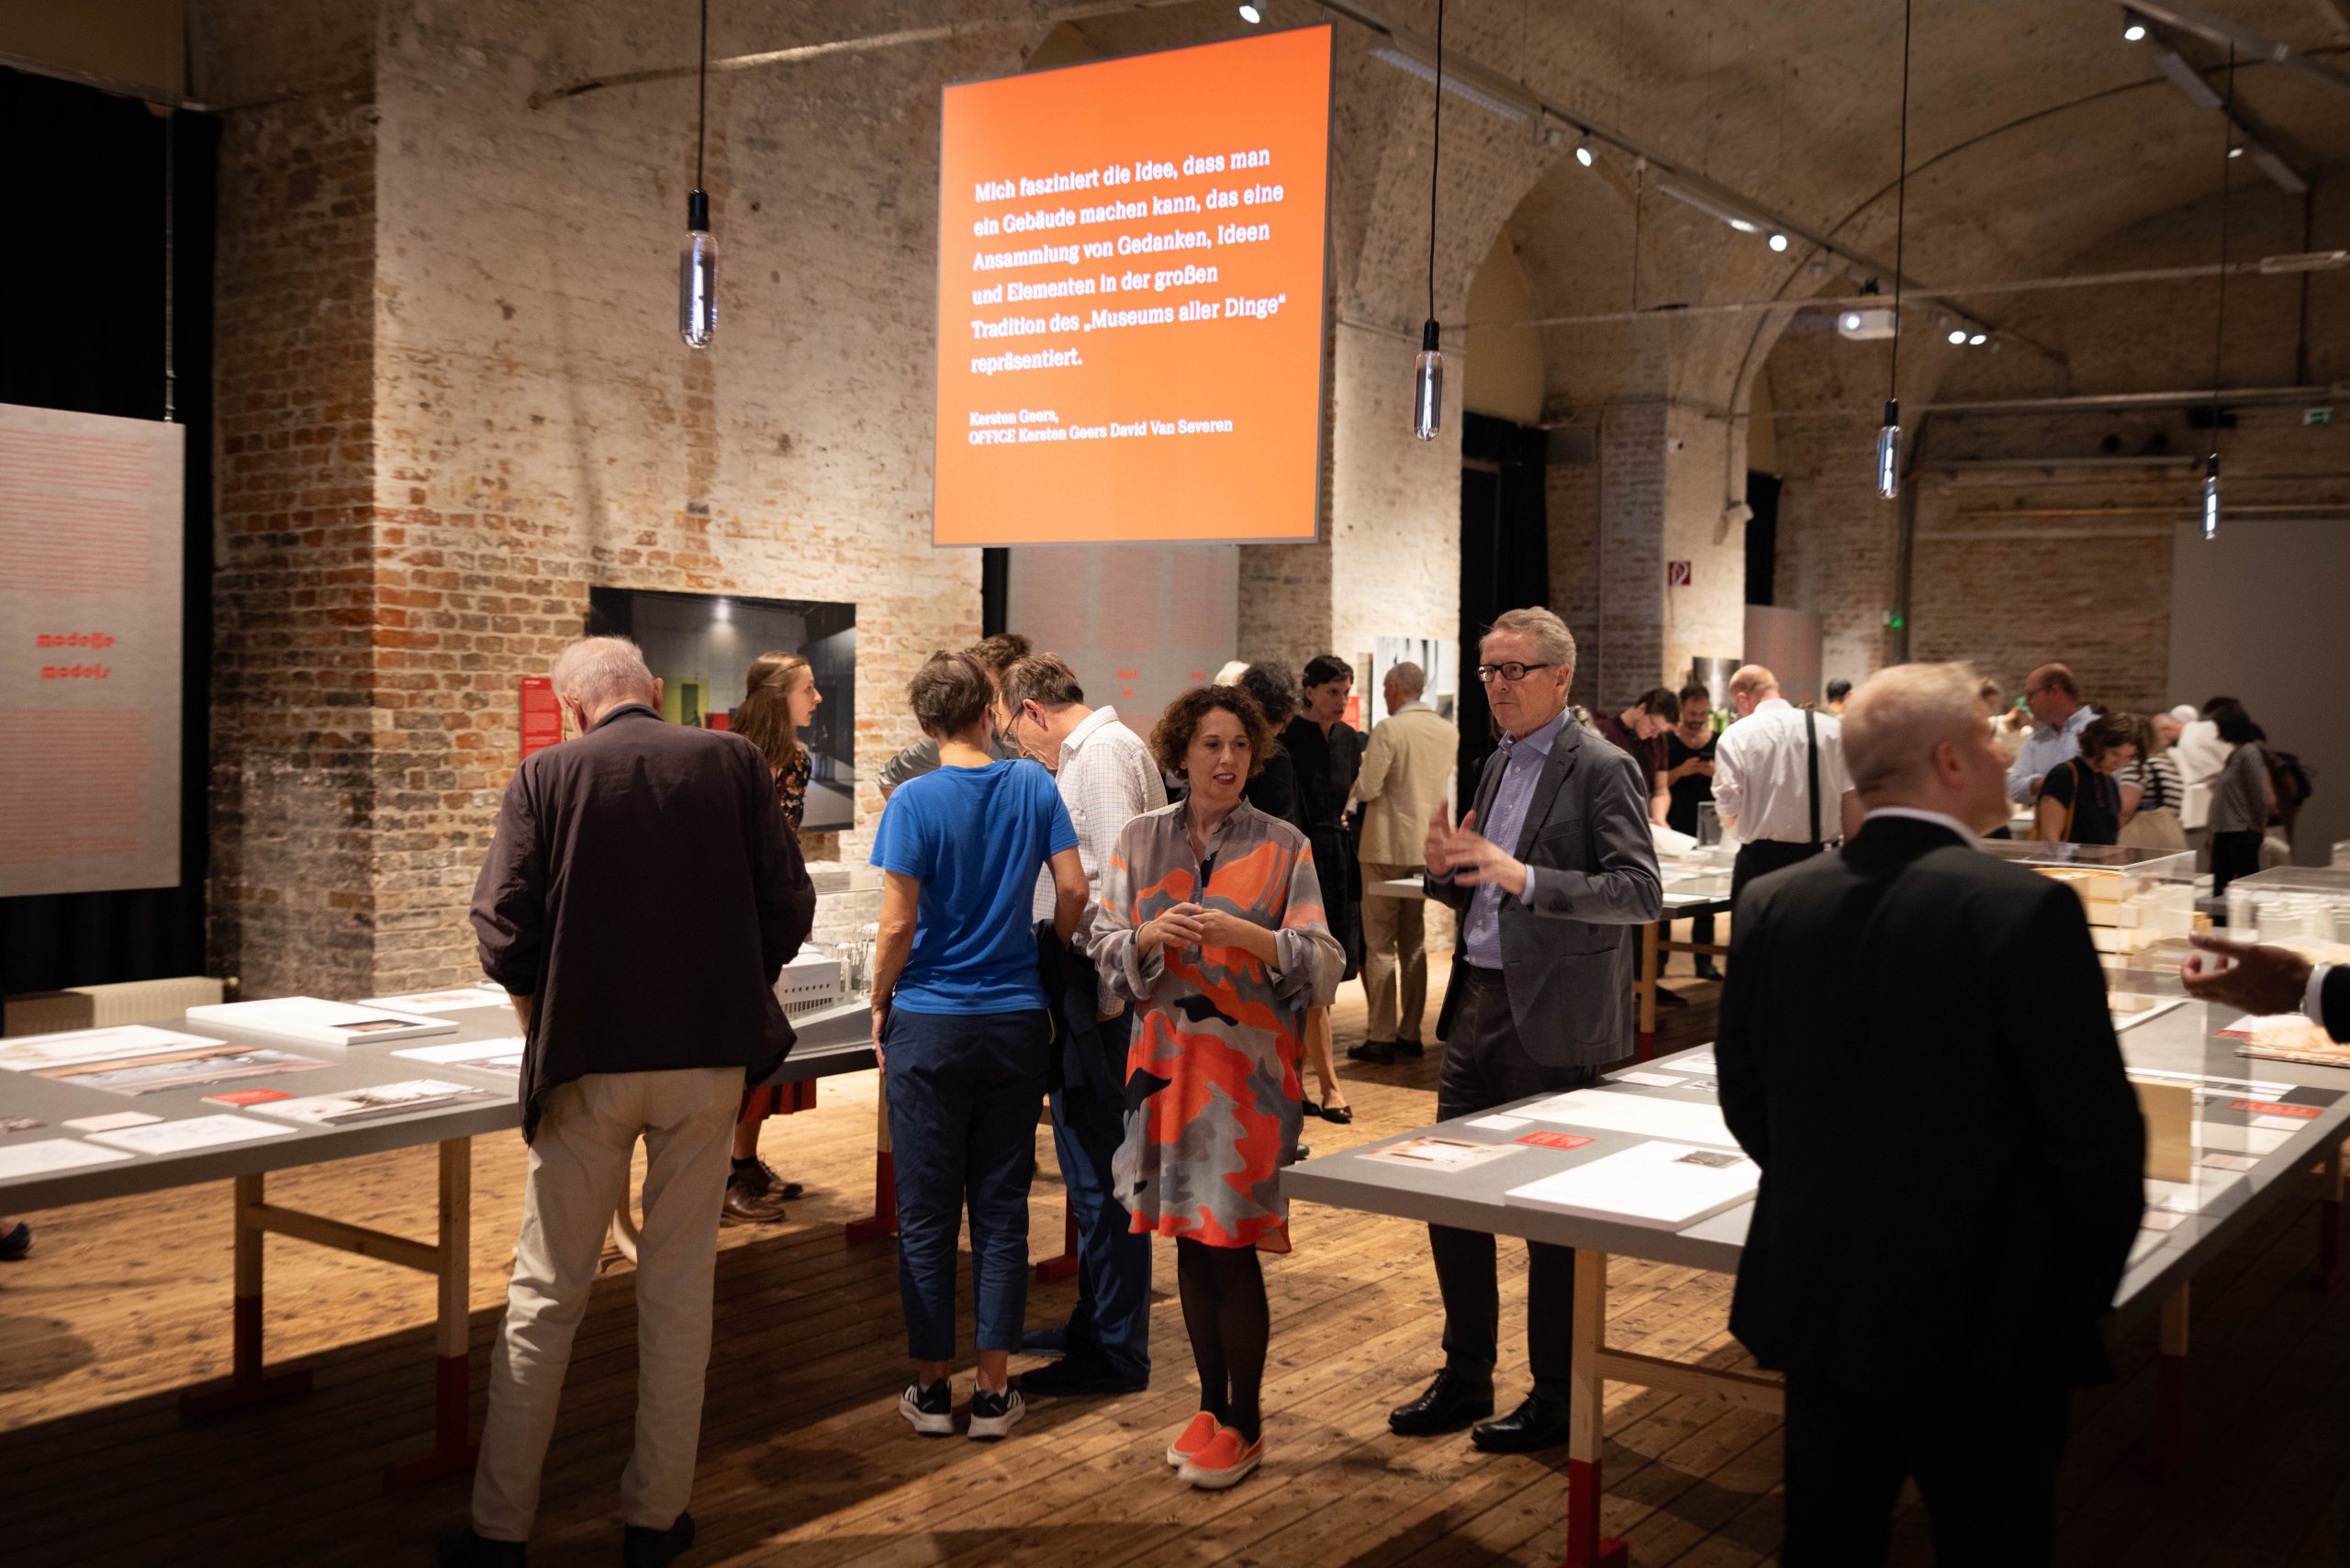 People in an exhibition, from the ceiling hangs a screen in orange colour with white writing